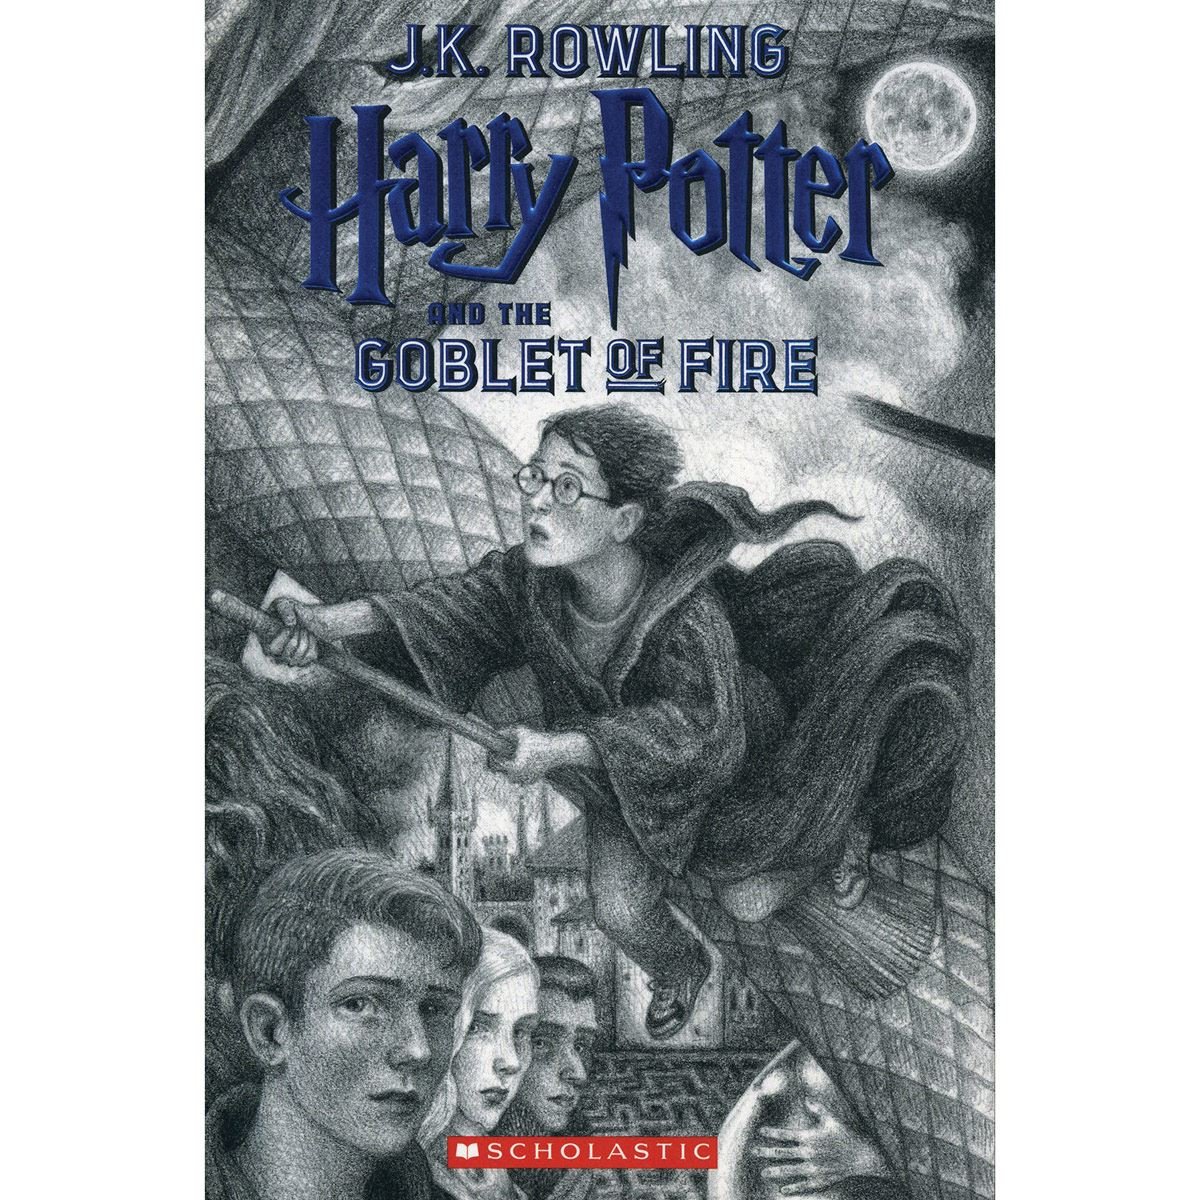 Harry Potter and the goblet of fire (Book 4)